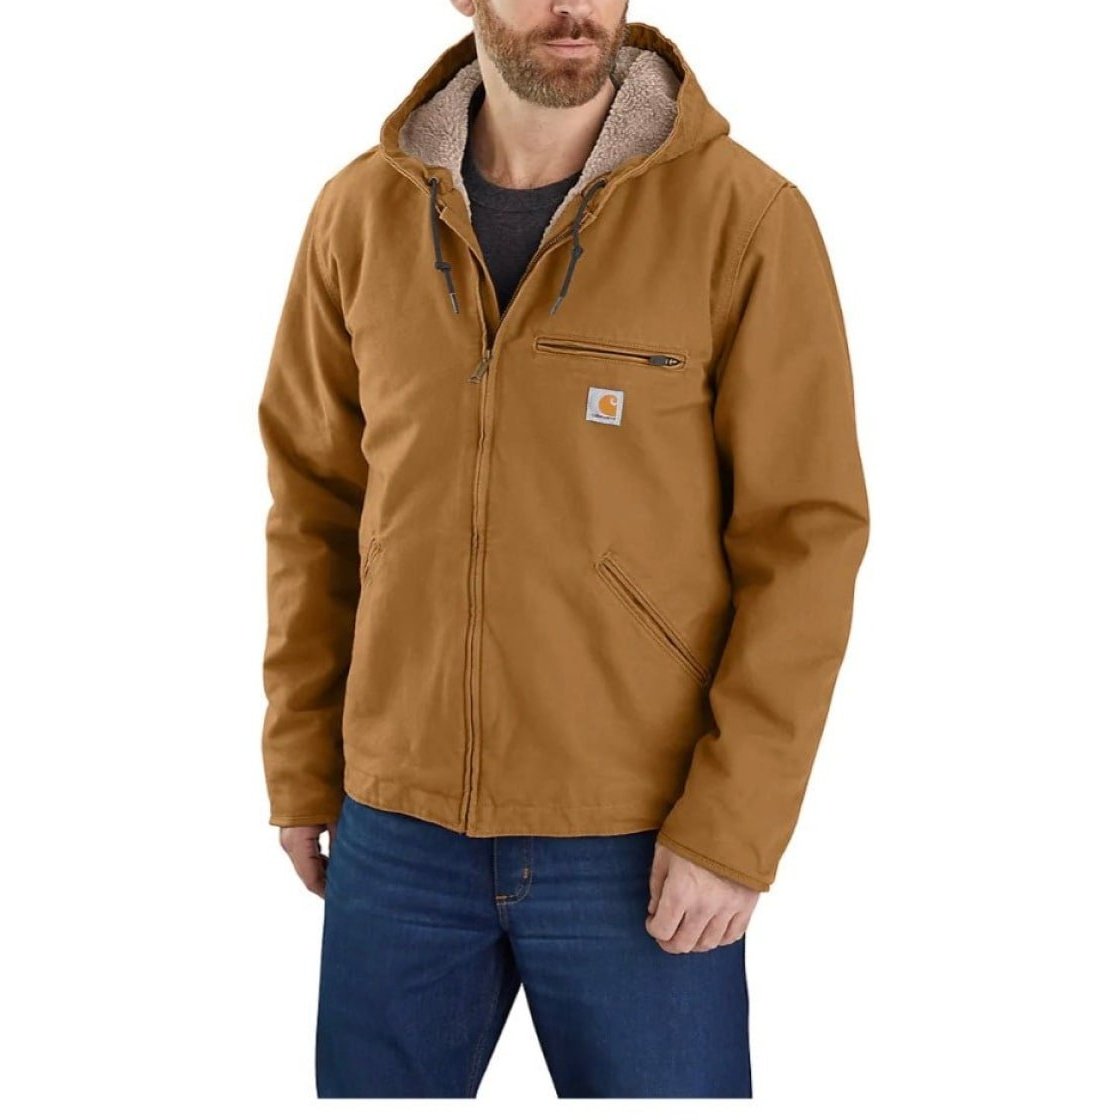 Carhartt Men’s Relaxed Fit Washed Duck Sherpa-Lined Jacket 104392 - Carhartt